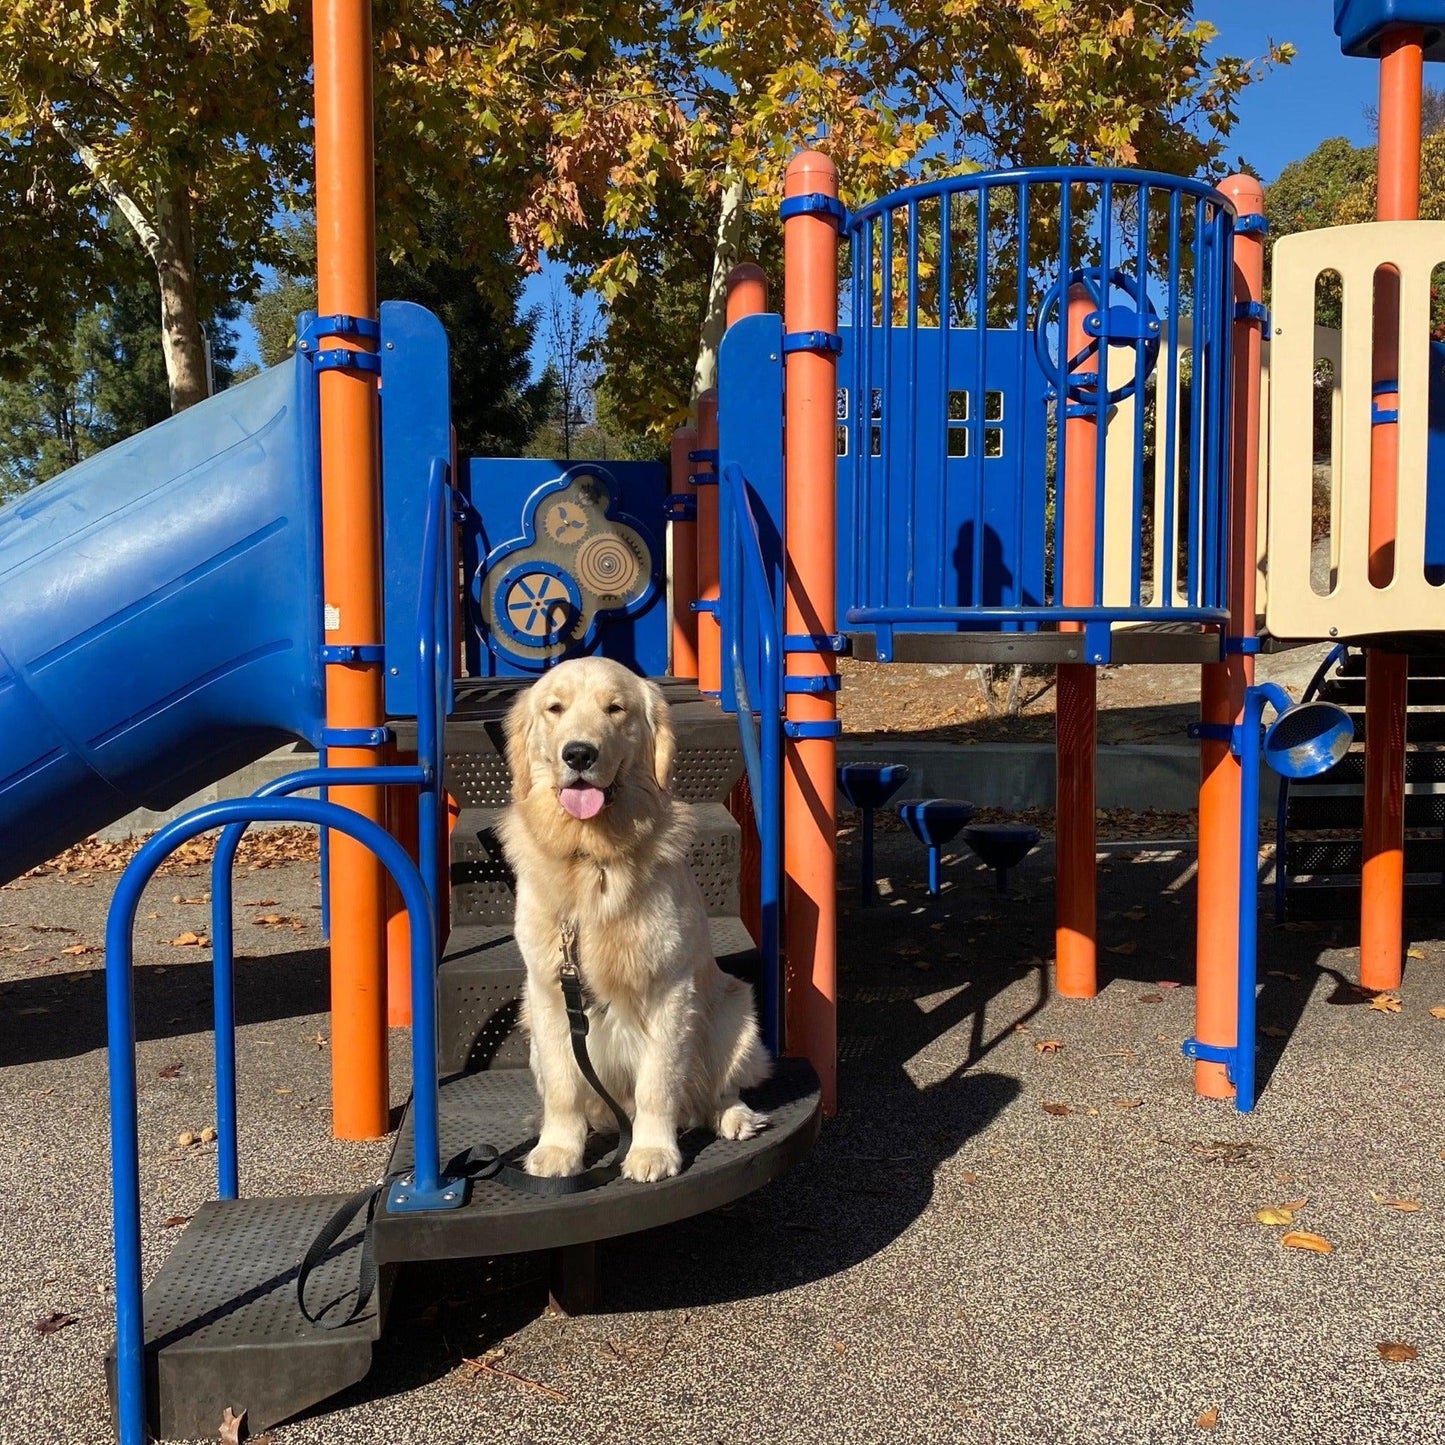 a photo of a large golden retriever sitting on a park play structure